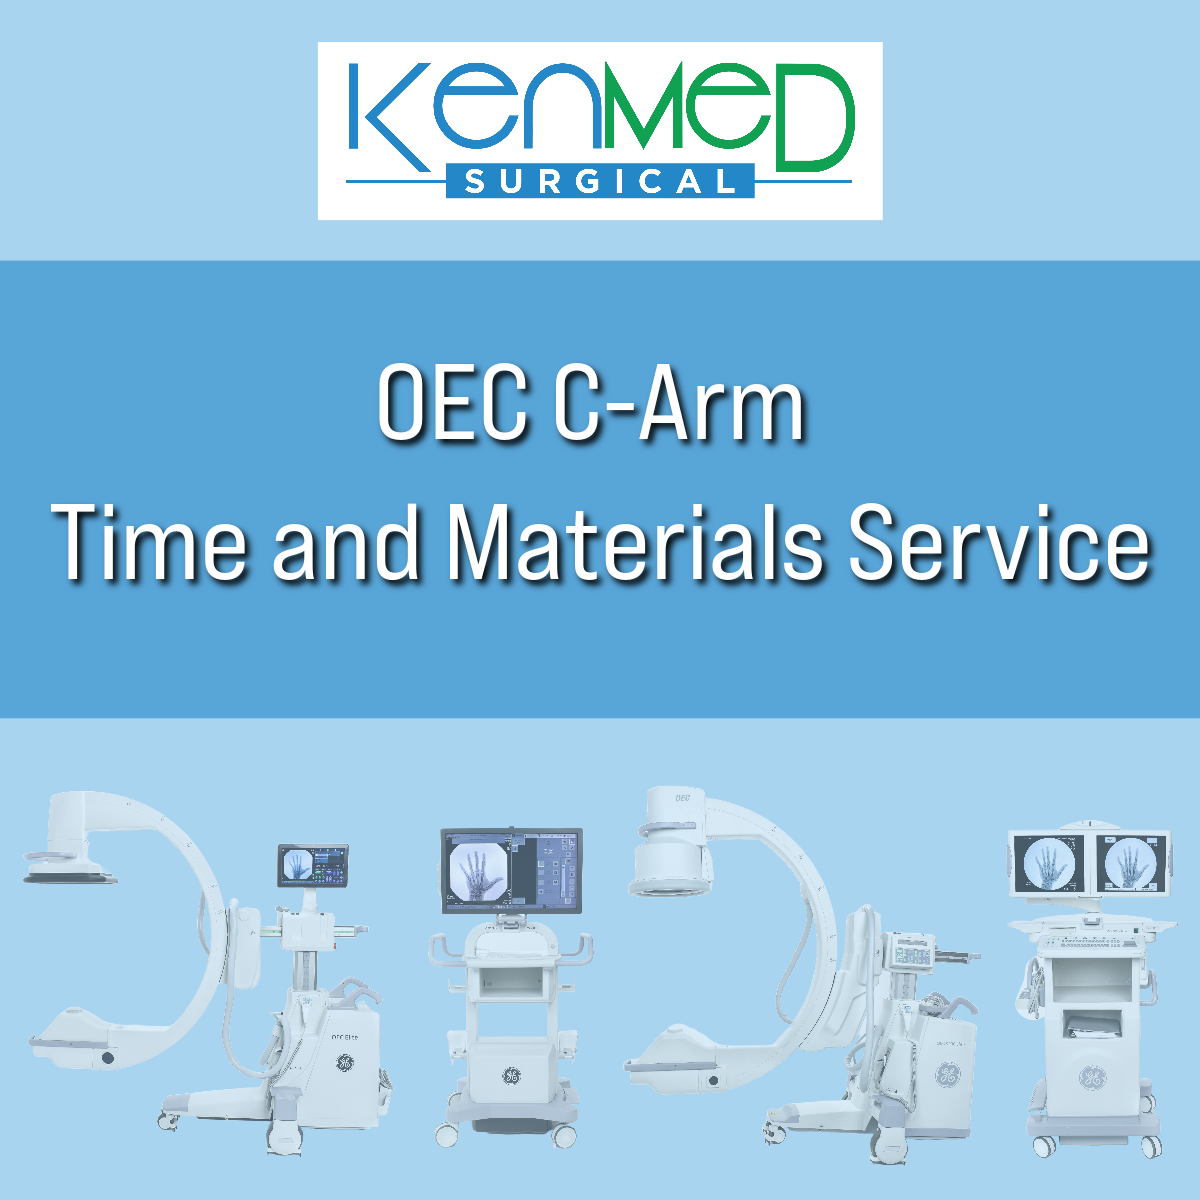 KenMed OEC C-Arm Time and Materials Service